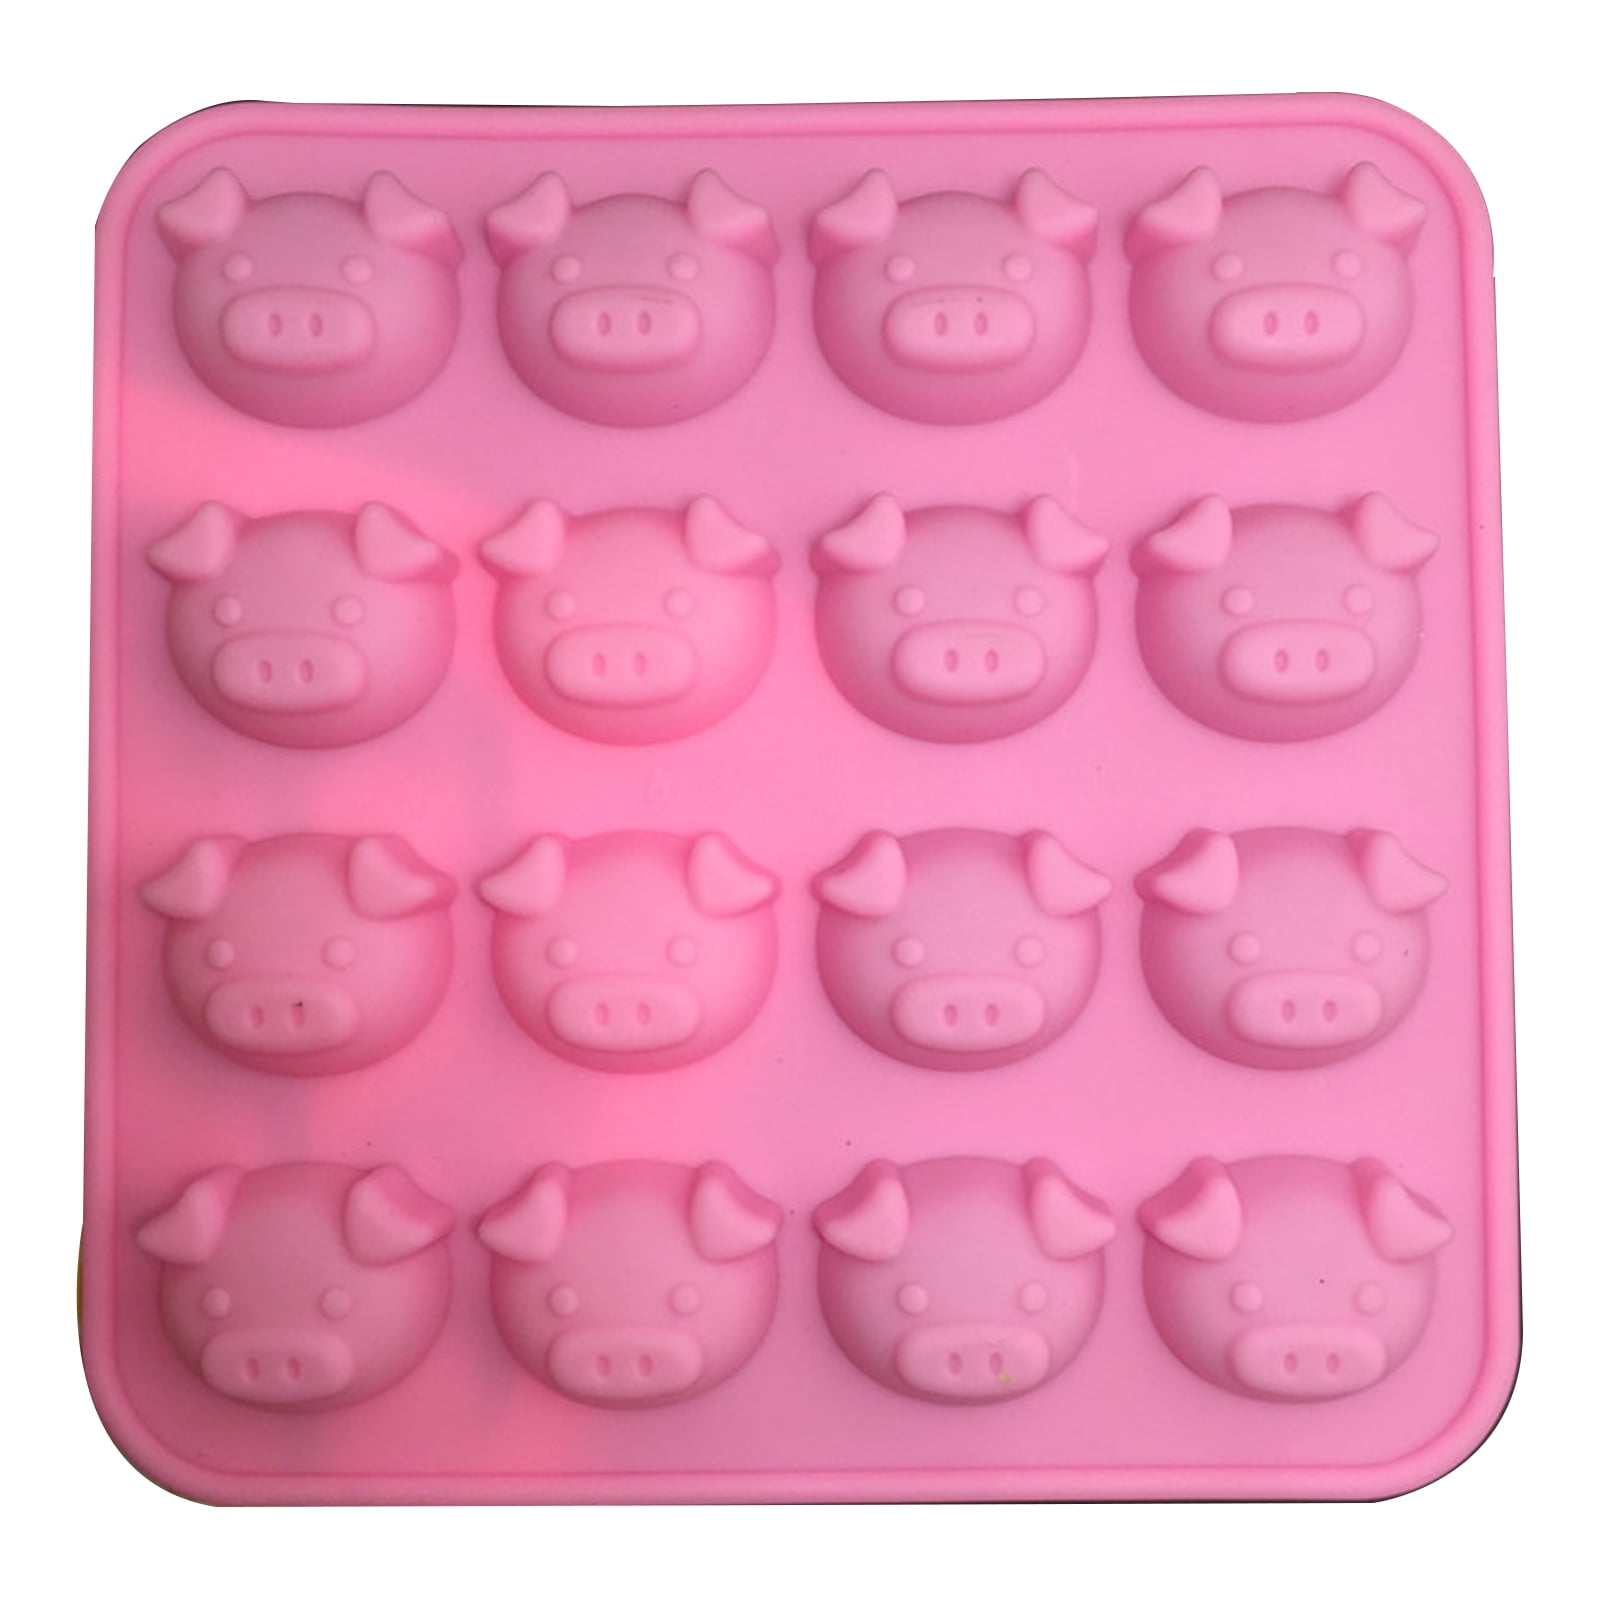 1pcs 12 even pig silicone mold cake chocolate baking tools 